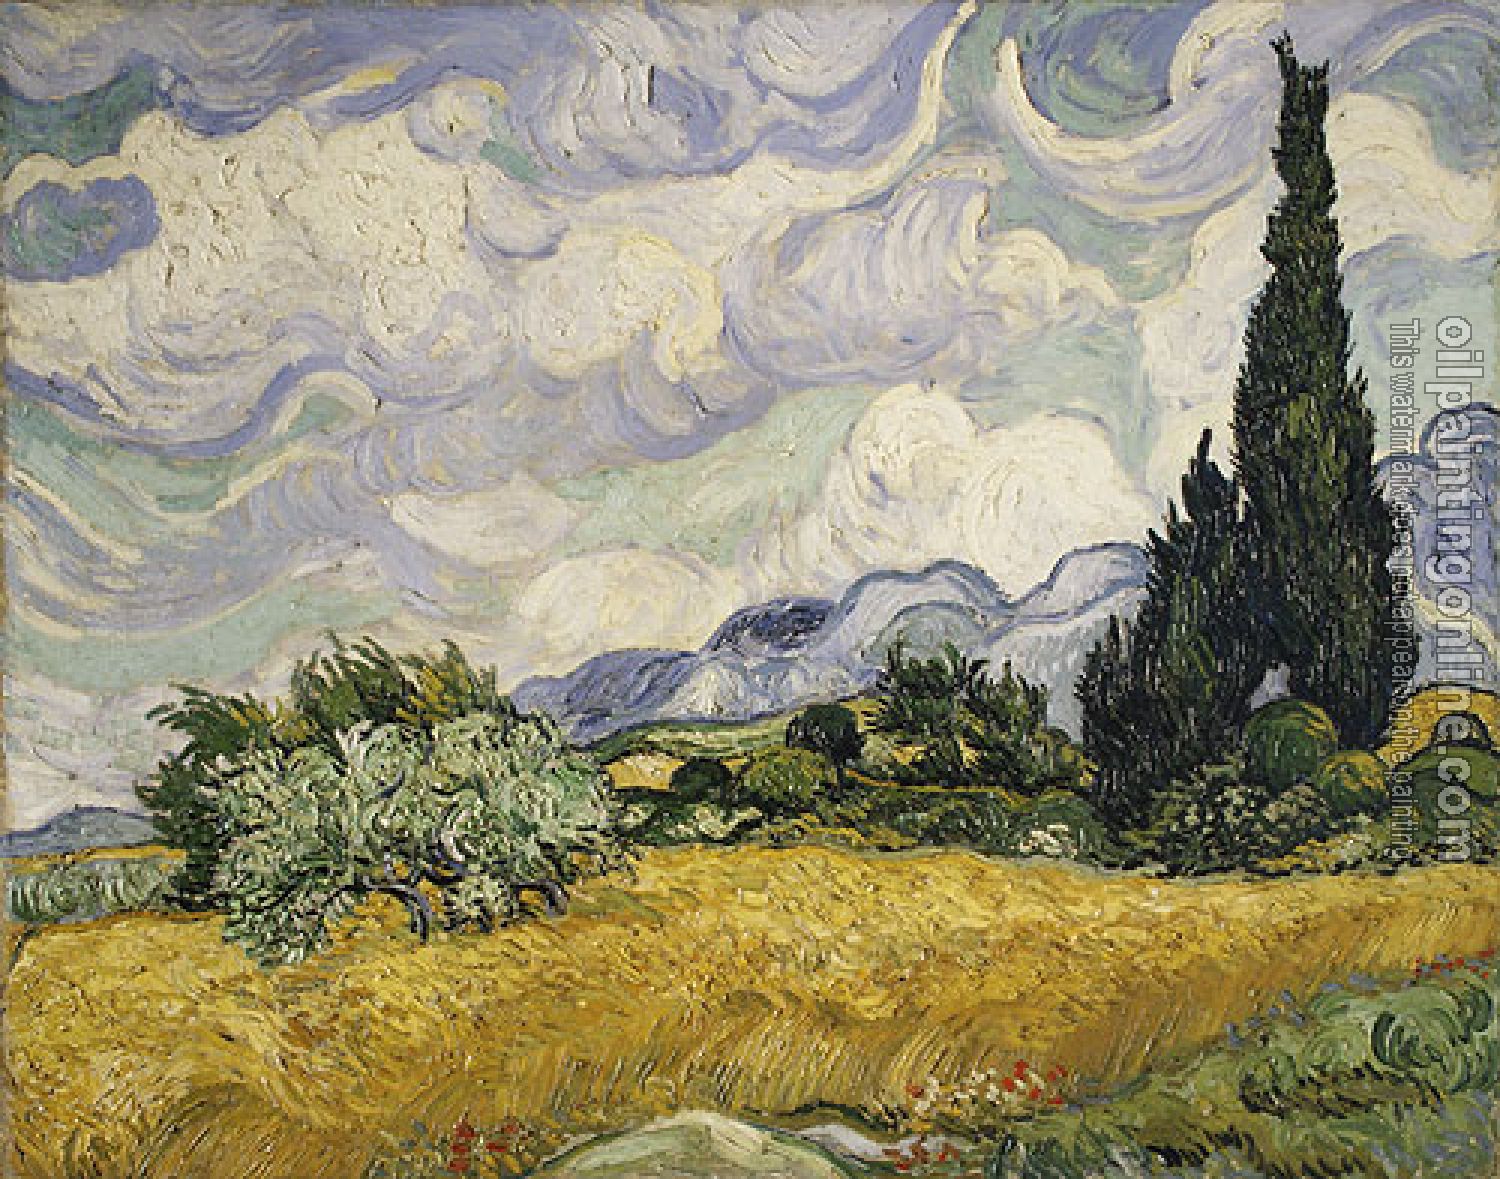 Gogh, Vincent van - Wheat Field with Cypresses